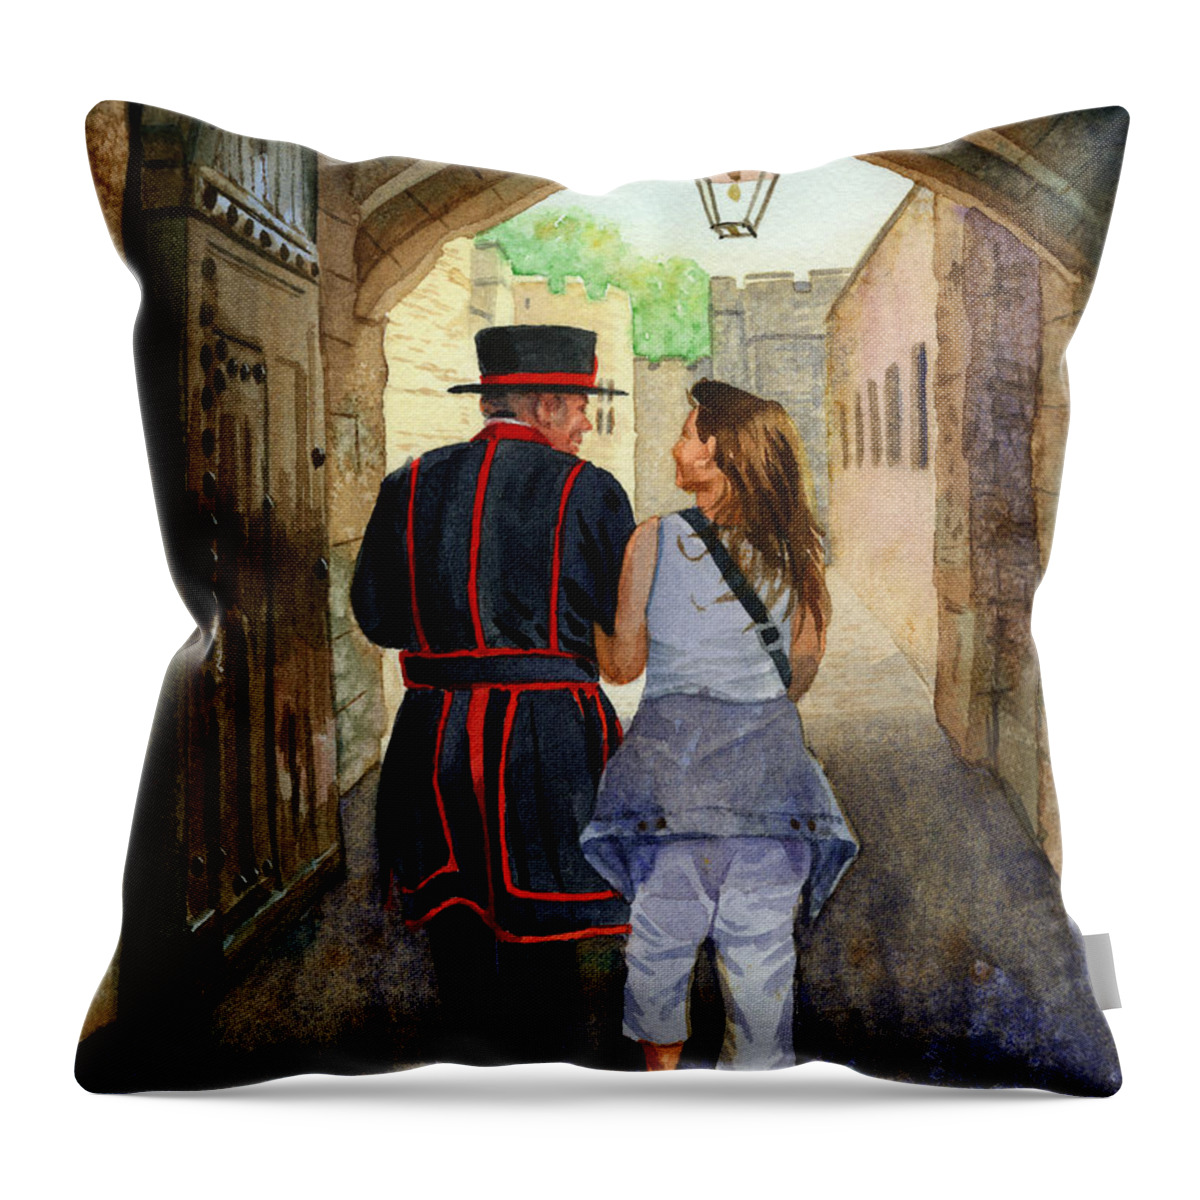 London Throw Pillow featuring the painting Across the Ages by Marguerite Chadwick-Juner